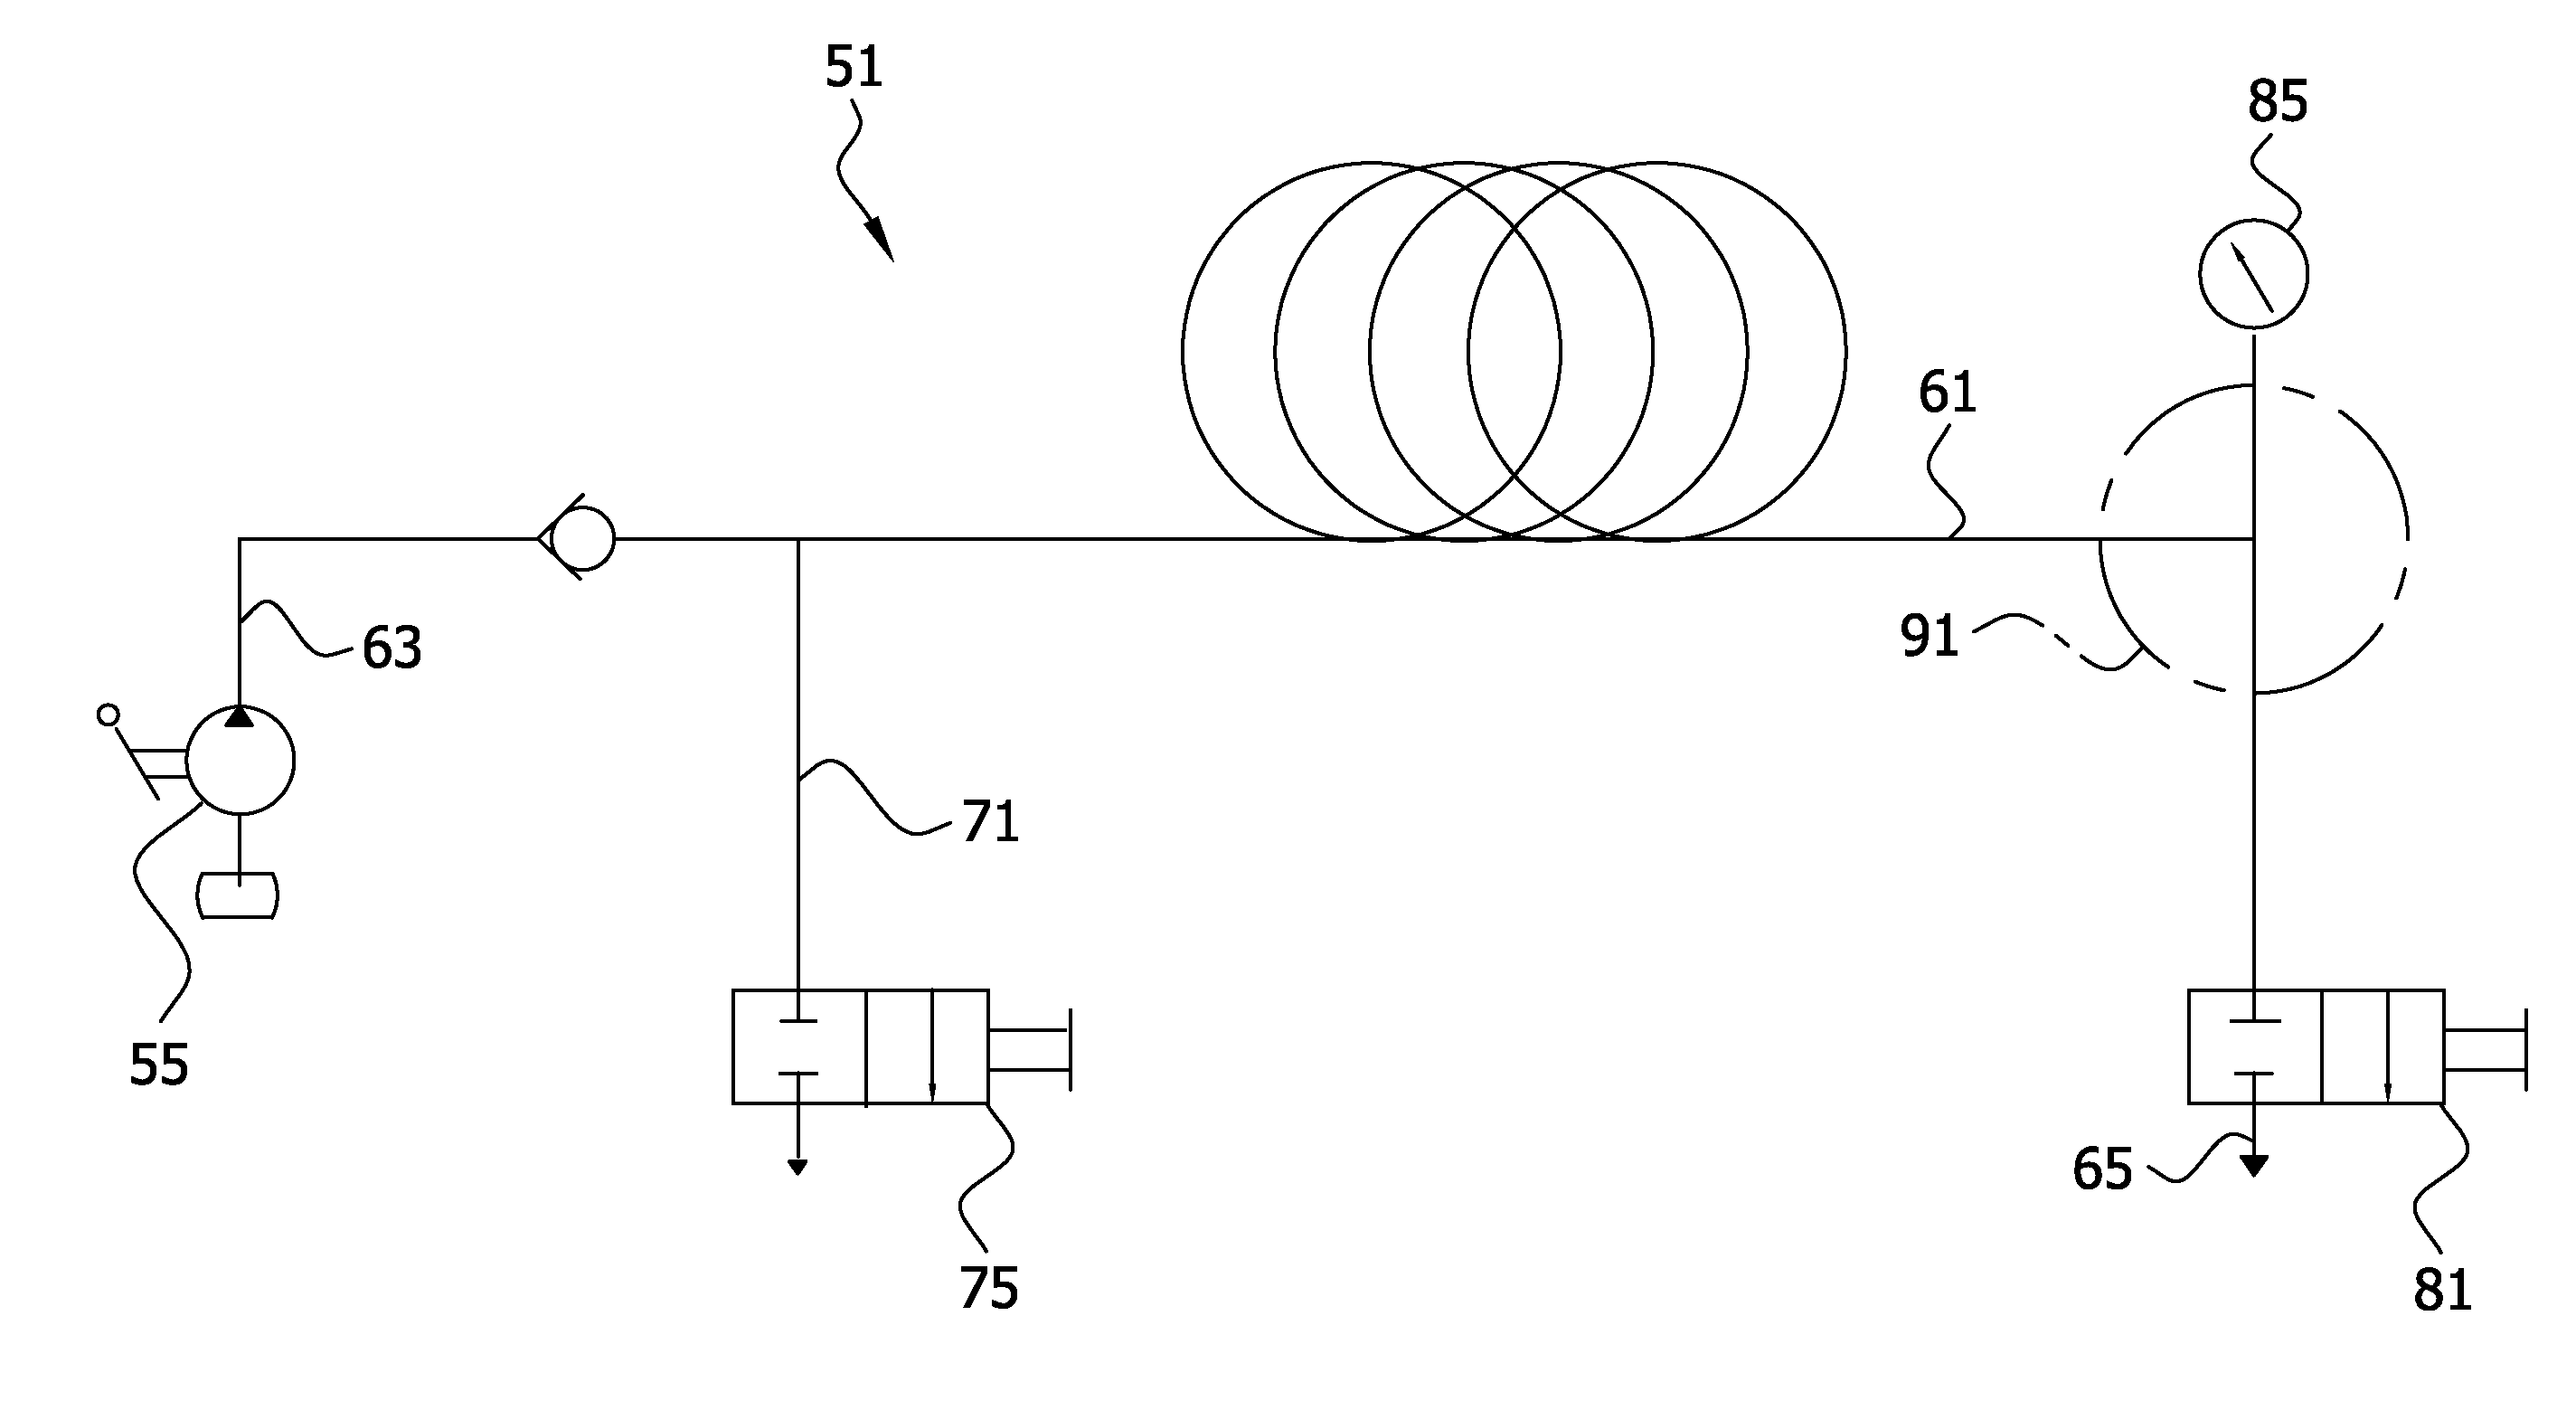 System and Method for Estimating Apparent Viscosity of a Non-Newtonian Fluid